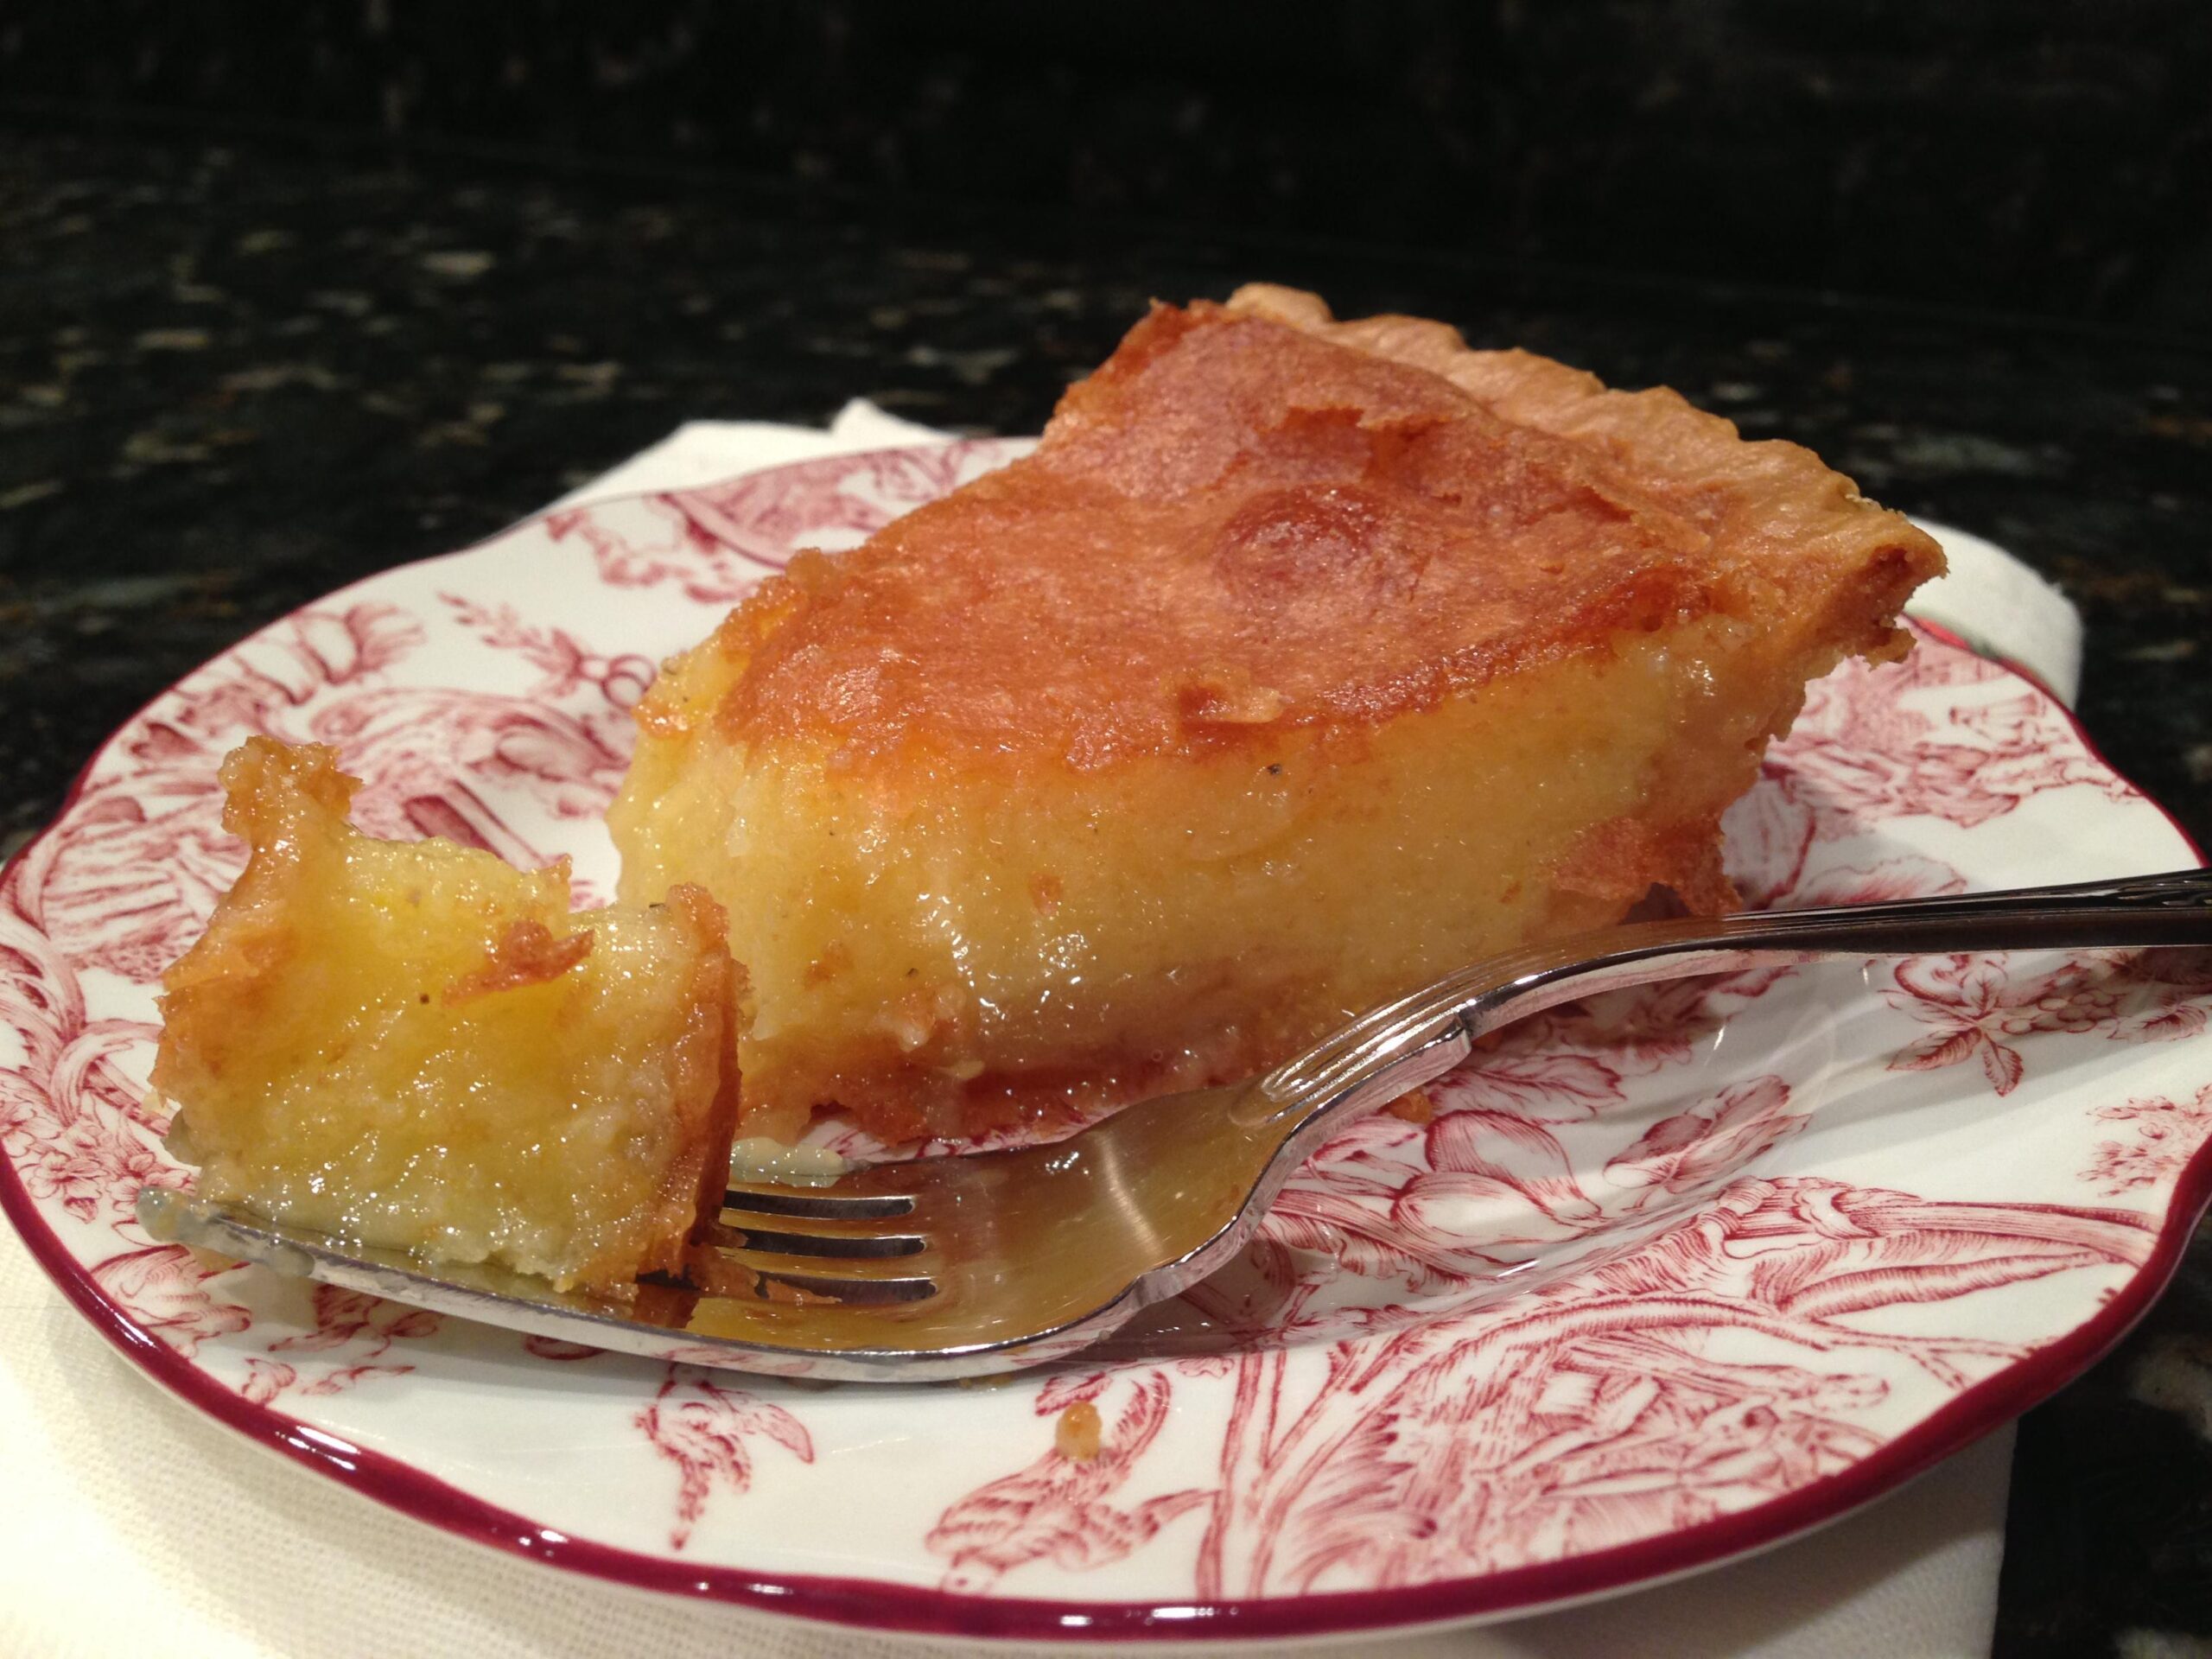  Don't forget to serve this Butter Chess Pie warm with a generous dollop of whipped cream!